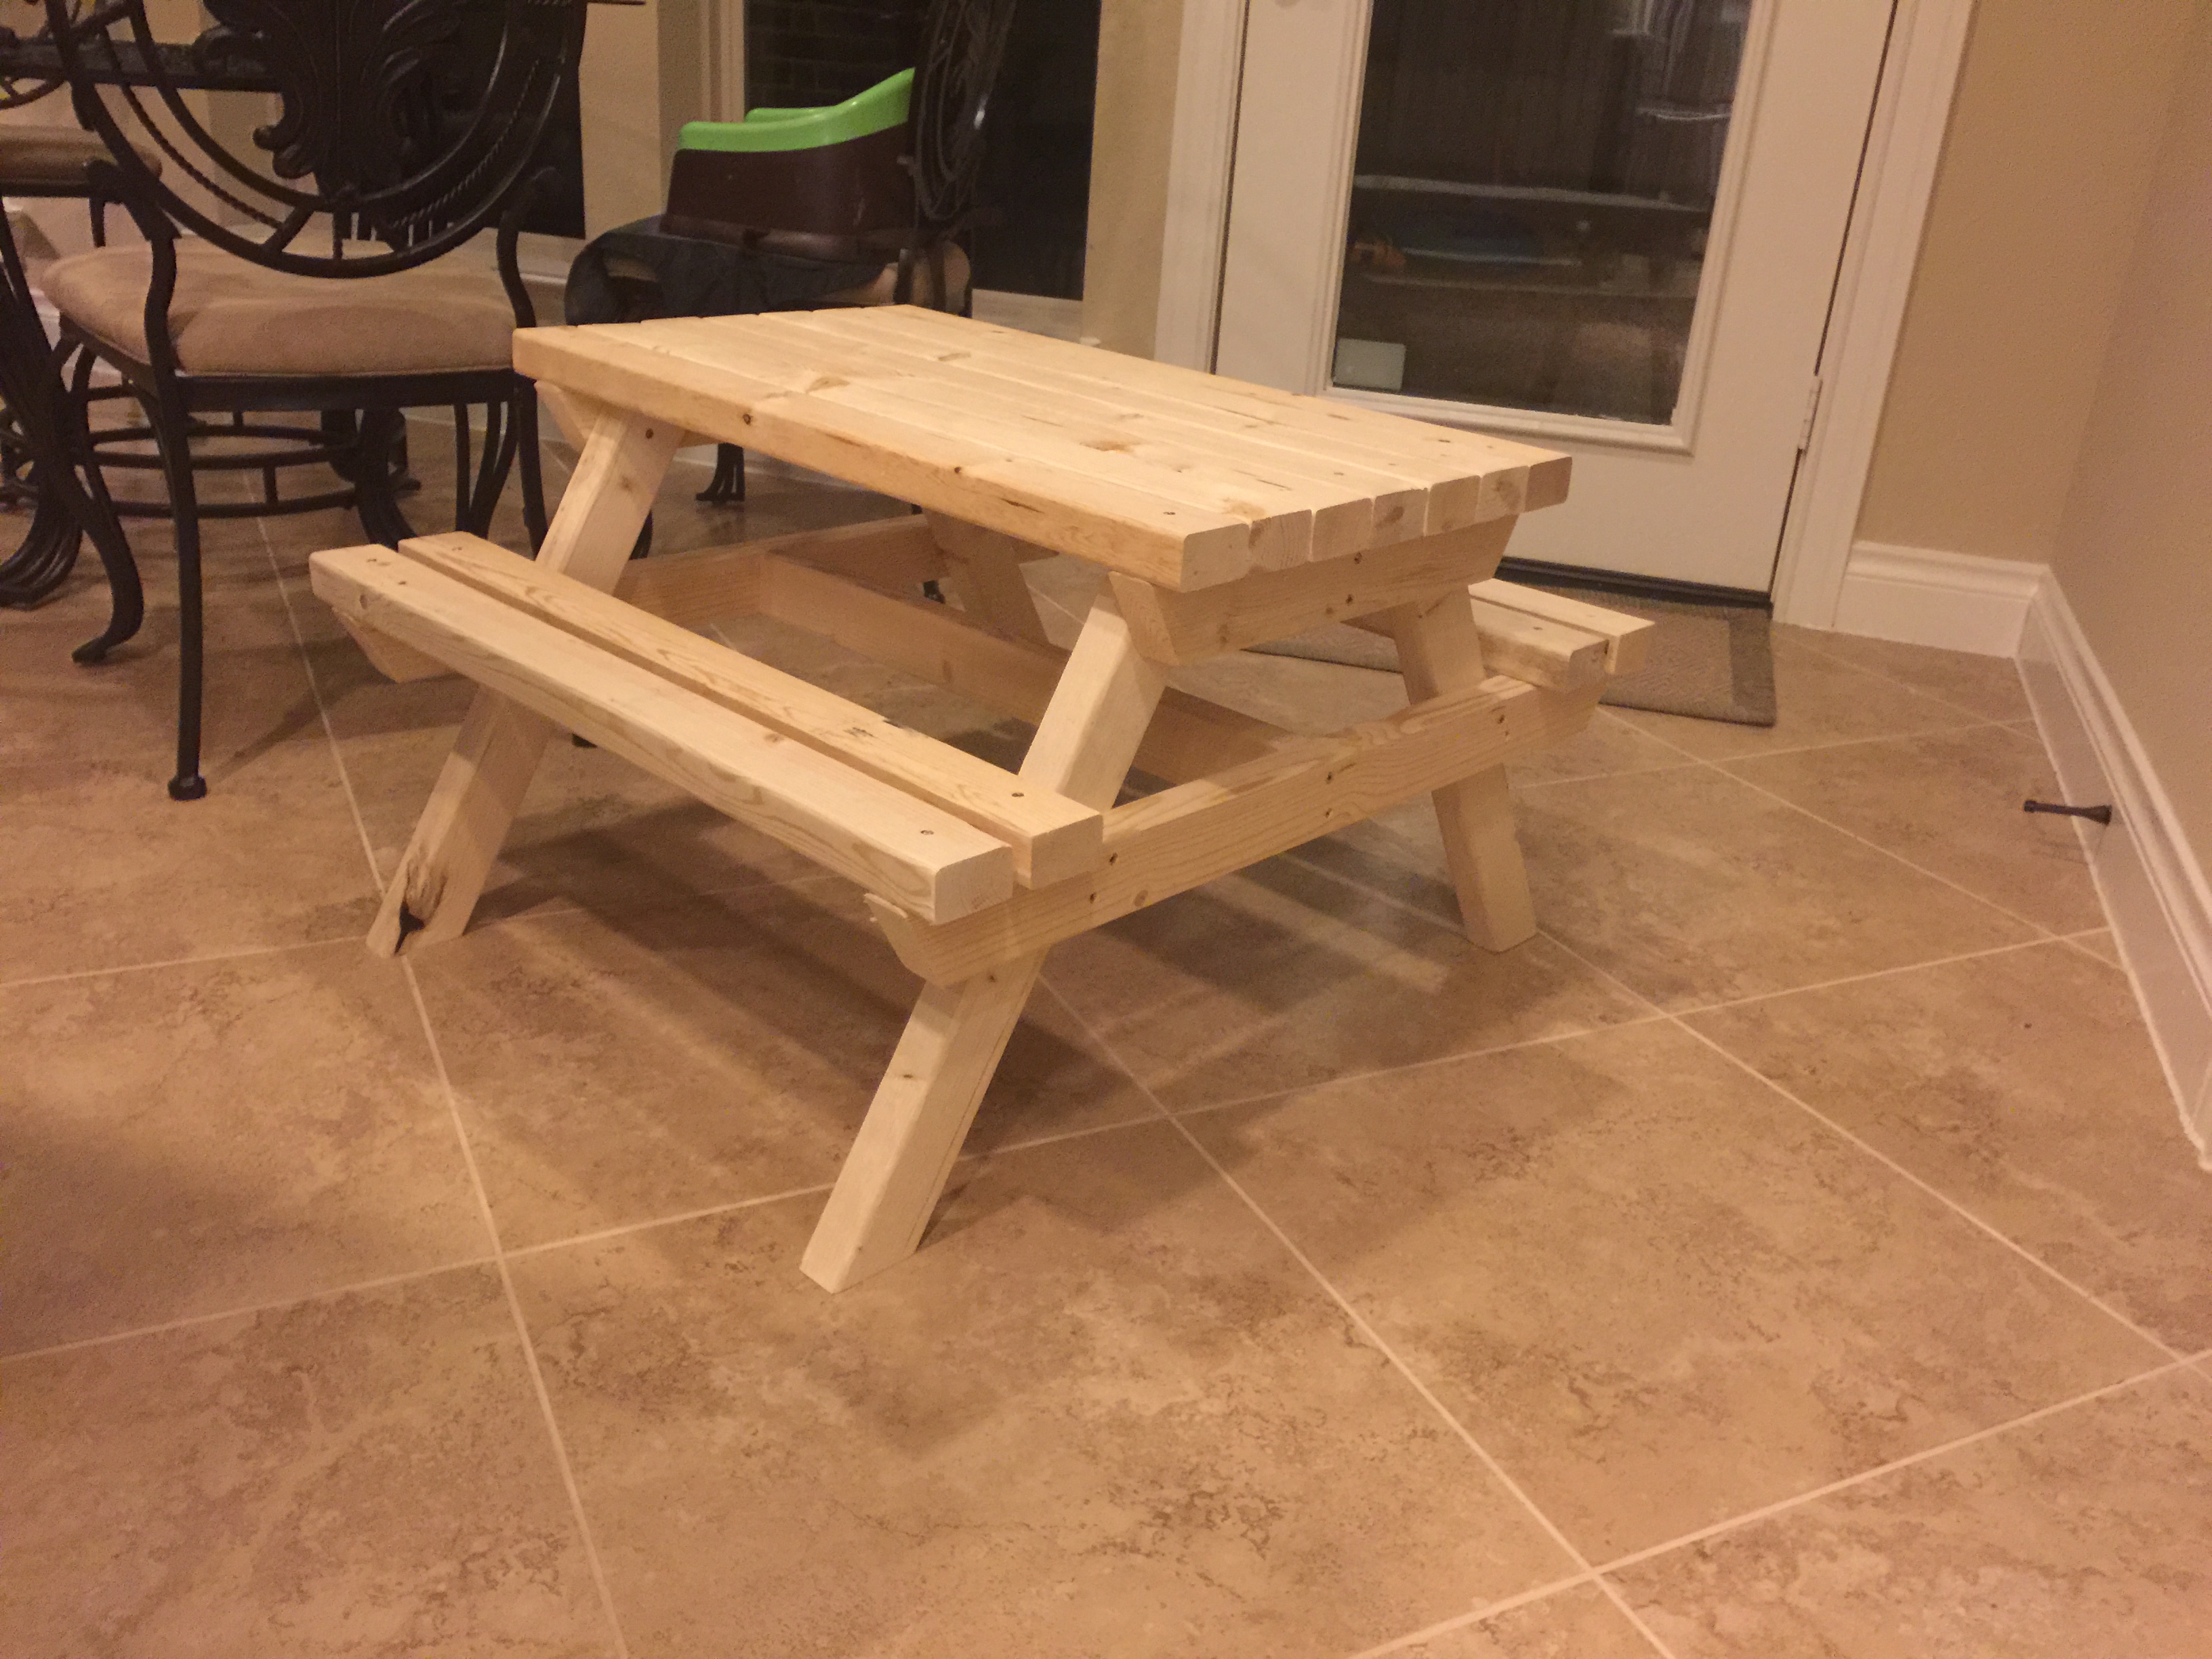 Toddler Sized Picnic Table | Ana White